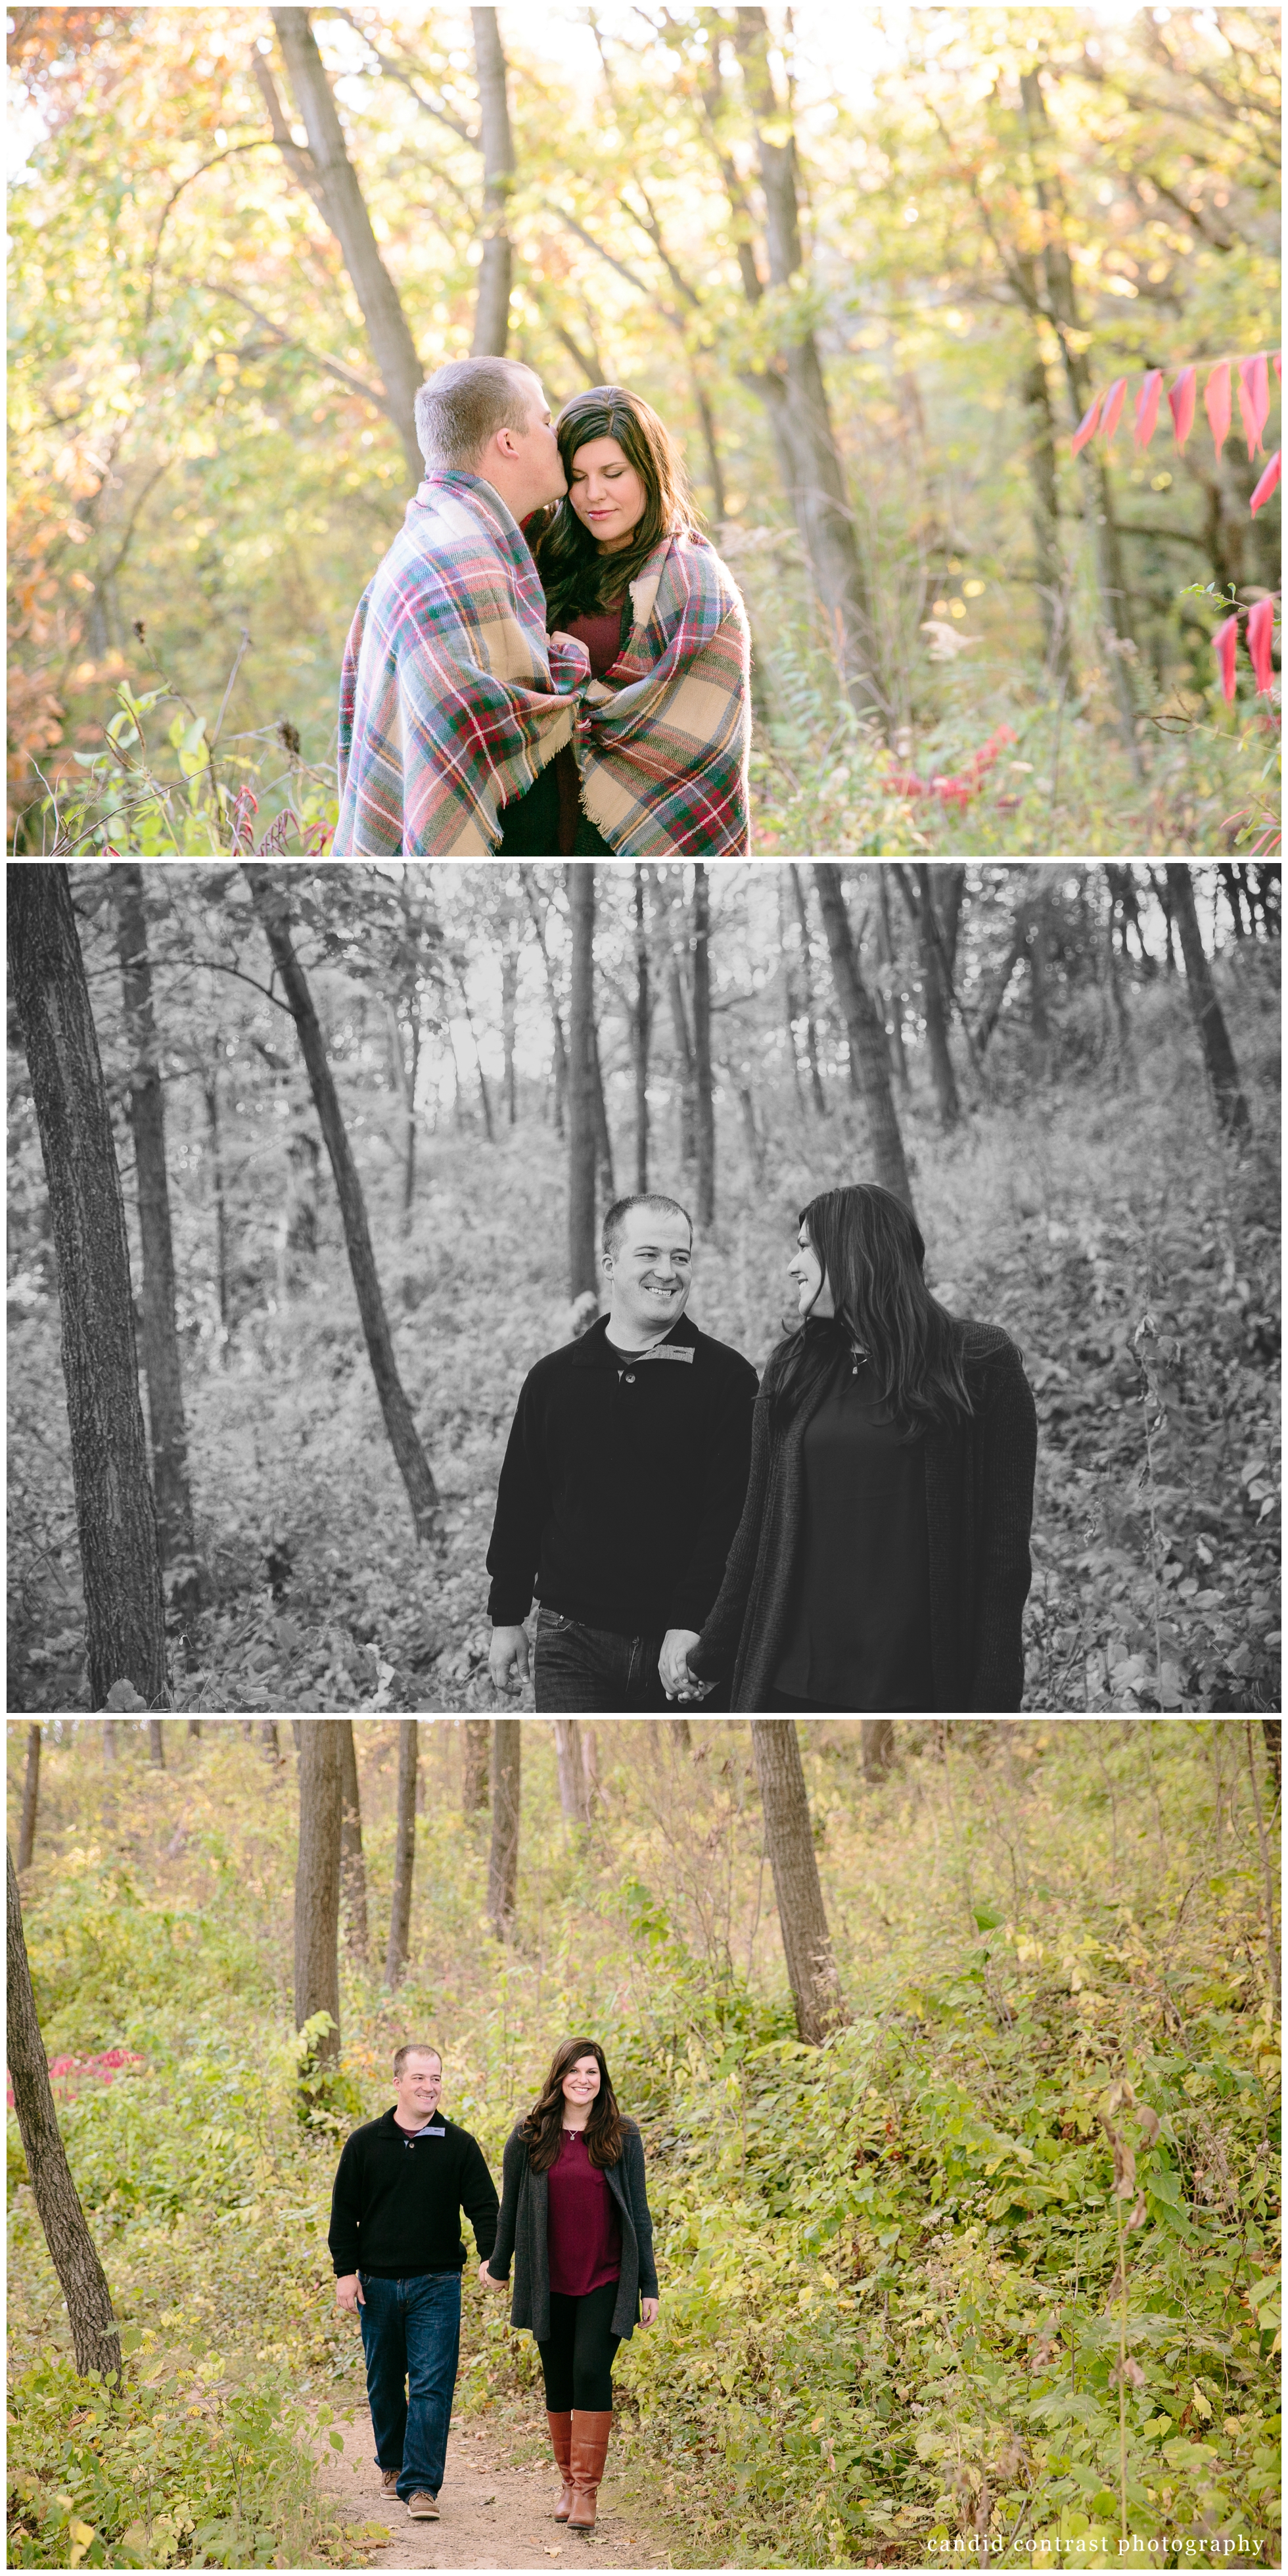 fall engagement session at the mines of spain in dubuque iowa, iowa wedding photographer Candid Contrast Photography